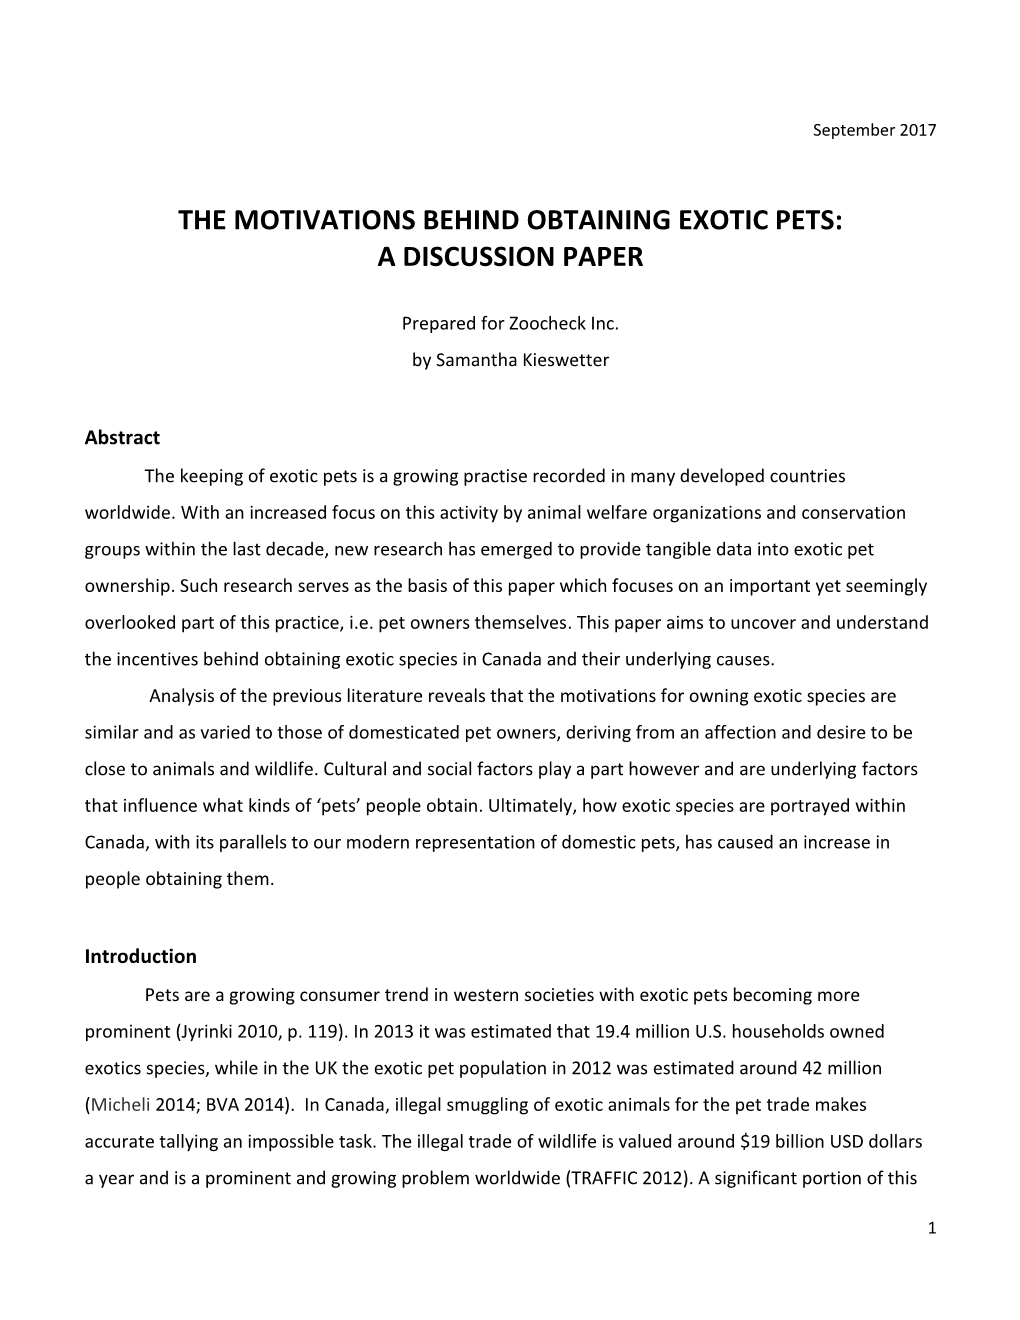 The Motivations Behind Obtaining Exotic Pets: a Discussion Paper